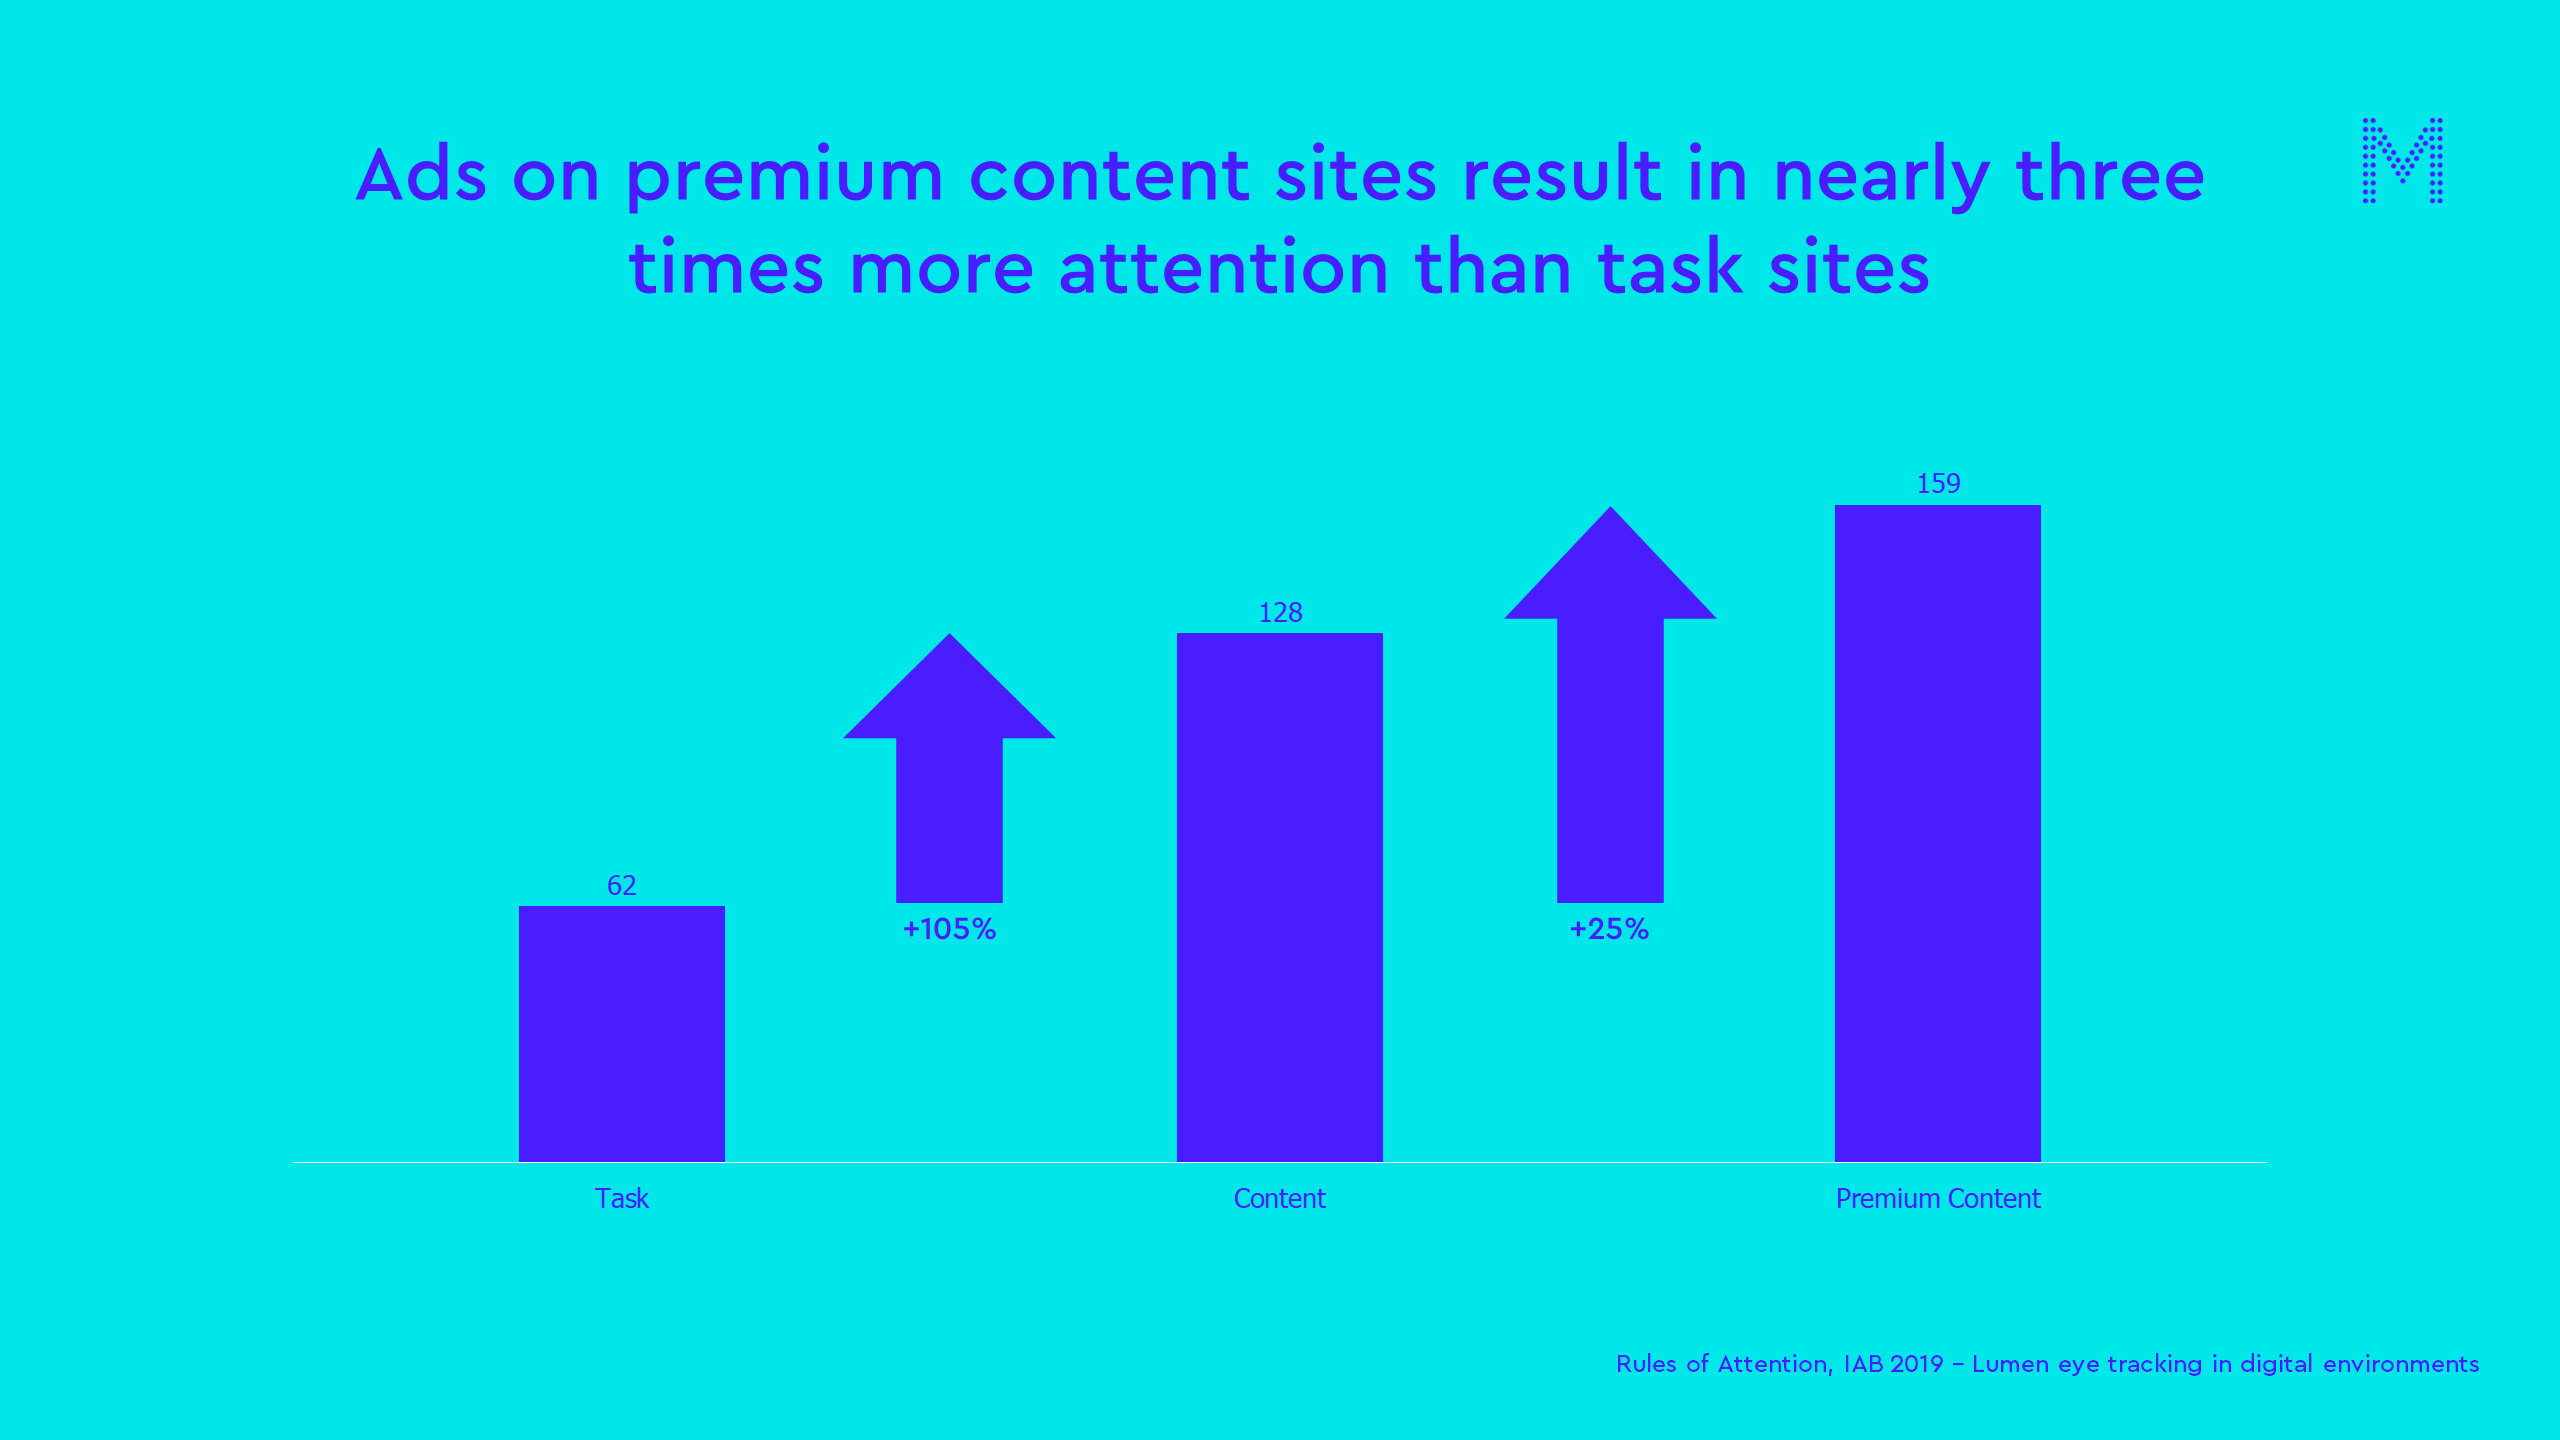 Ads on premium content sites result in nearly three times more attention than task